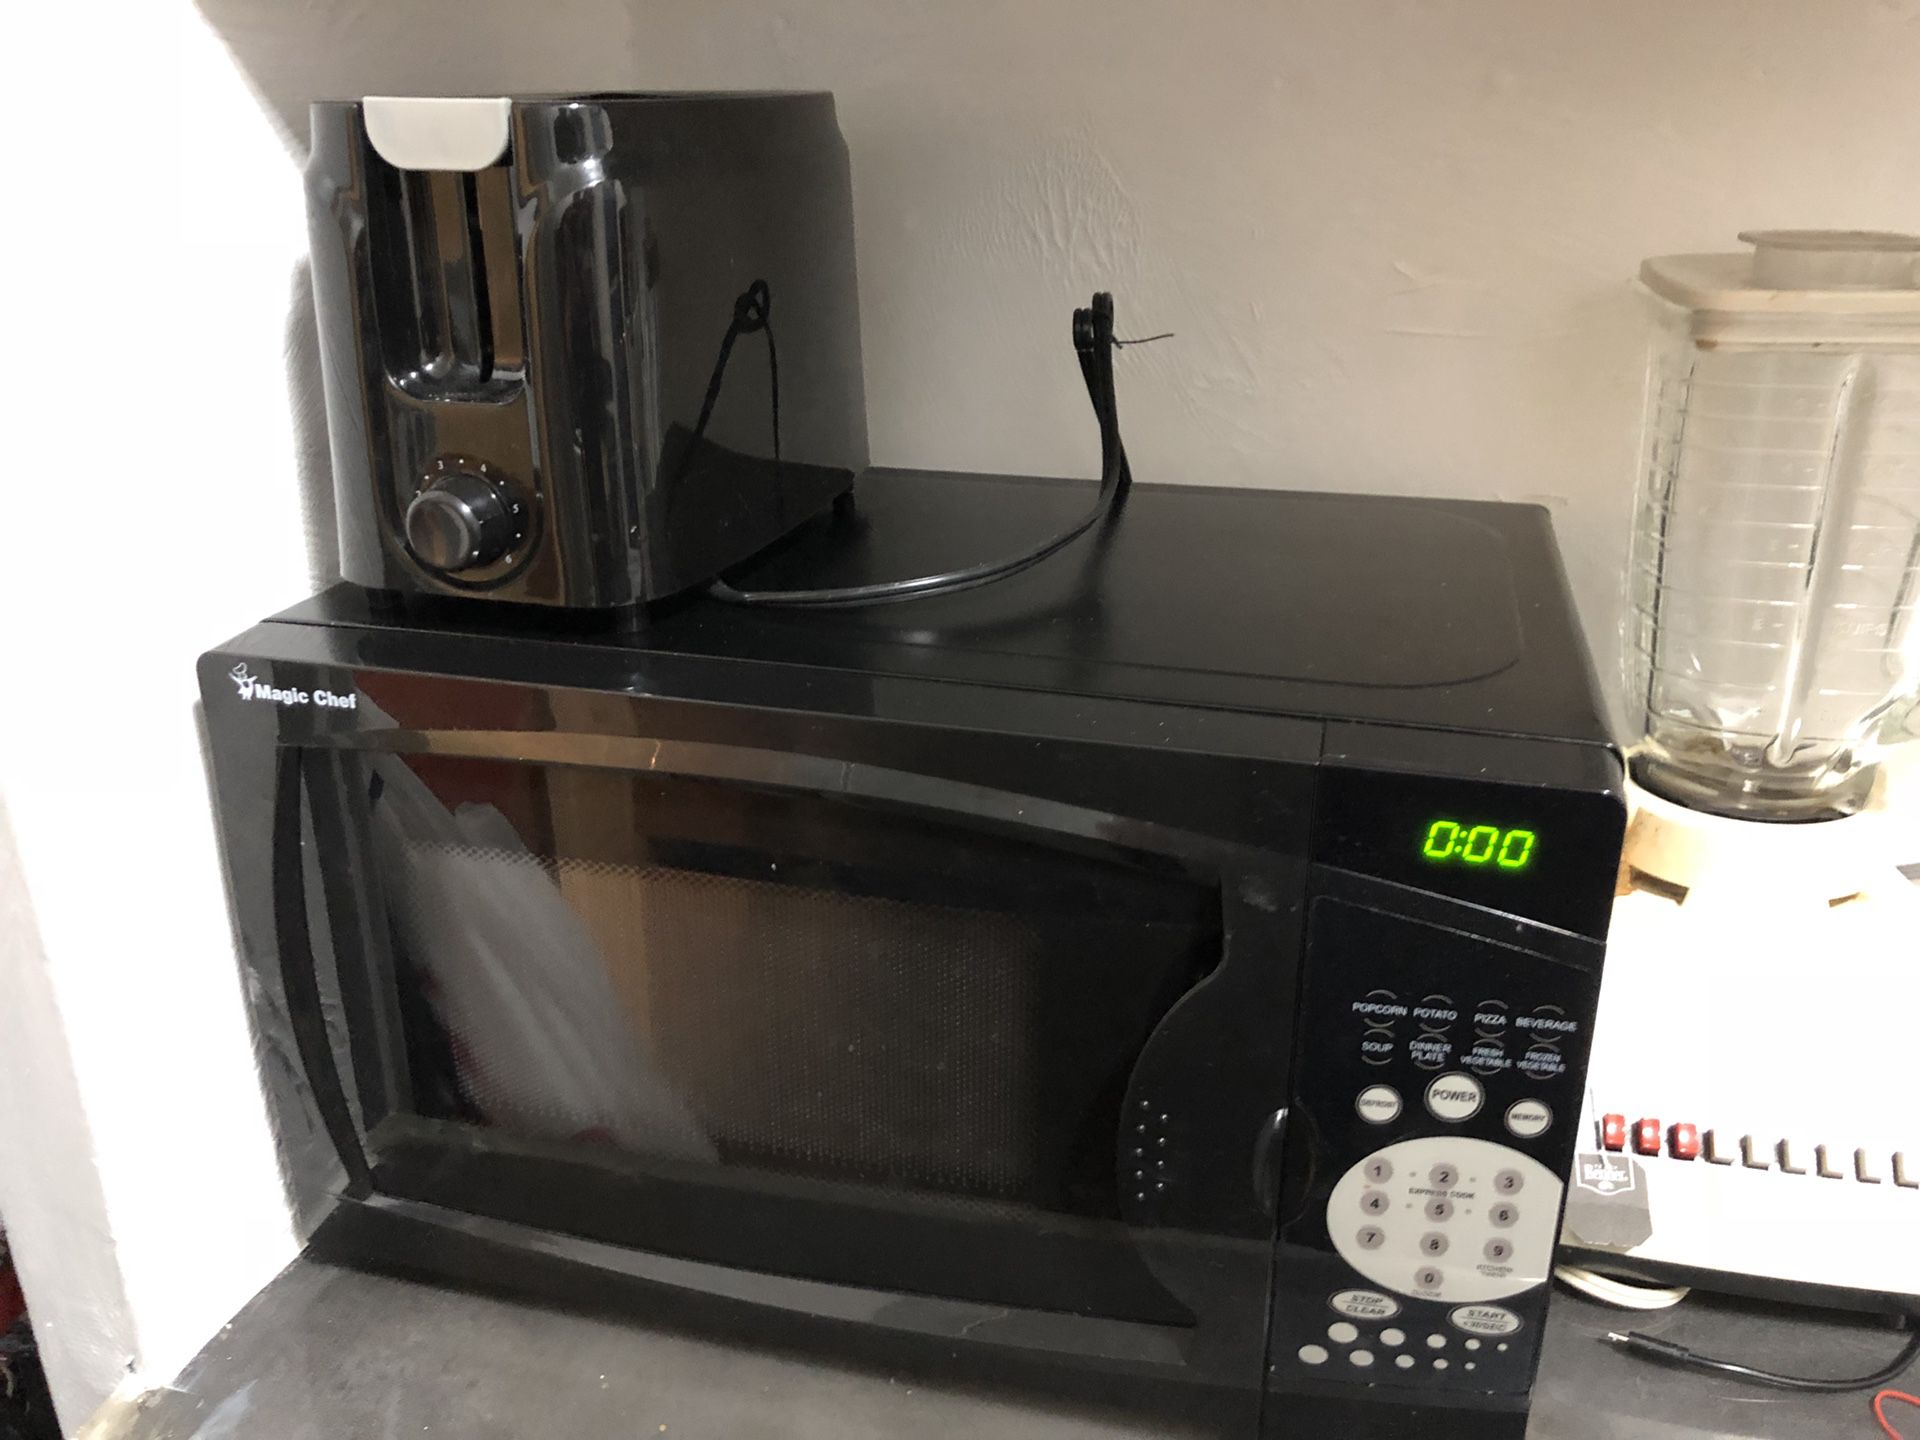 Microwave and toaster for 20$